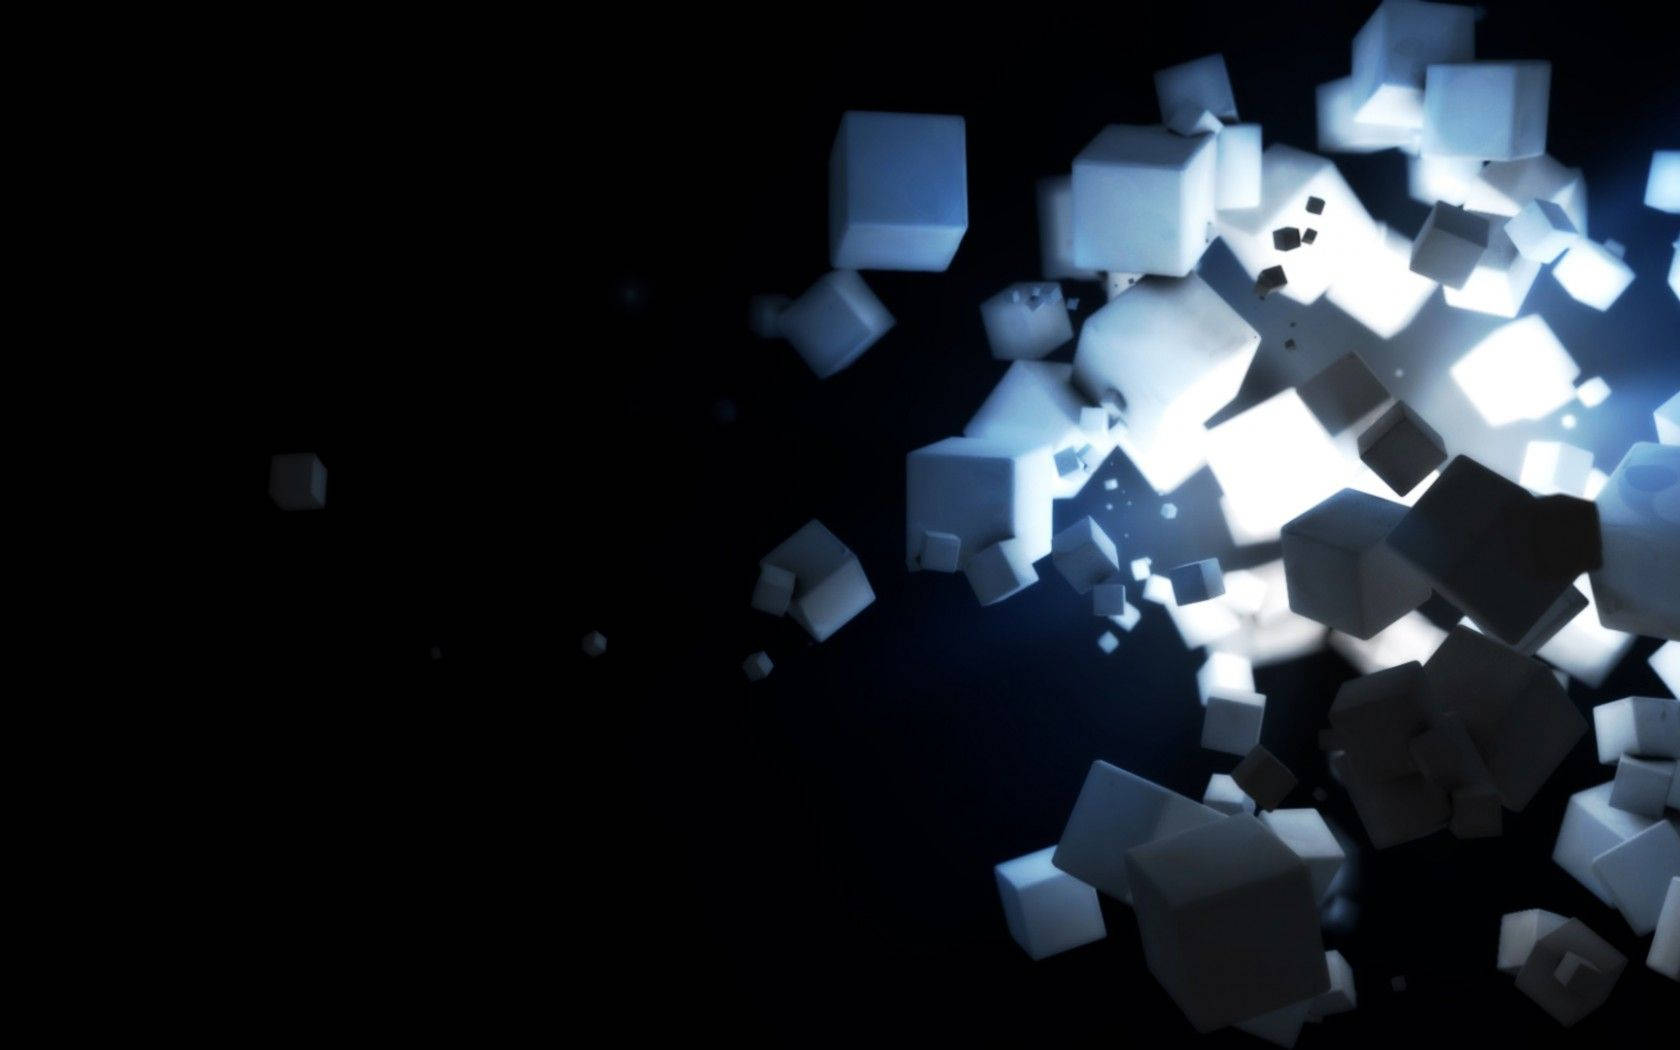 Cool Dark With White Cubes Background